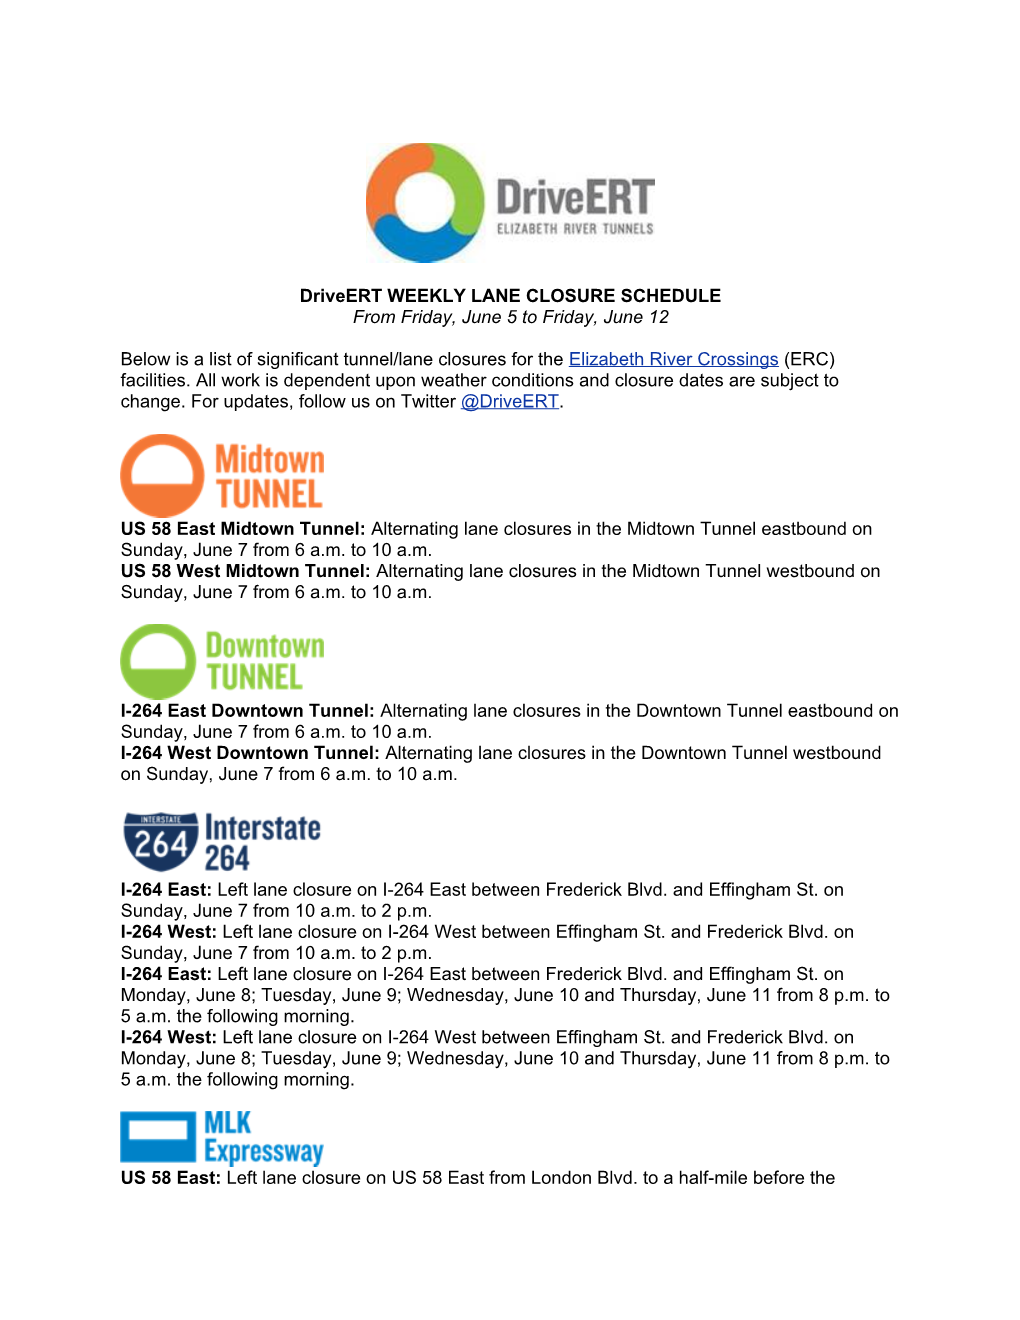 Driveert WEEKLY LANE CLOSURE SCHEDULE from Friday, June 5 to Friday, June 12